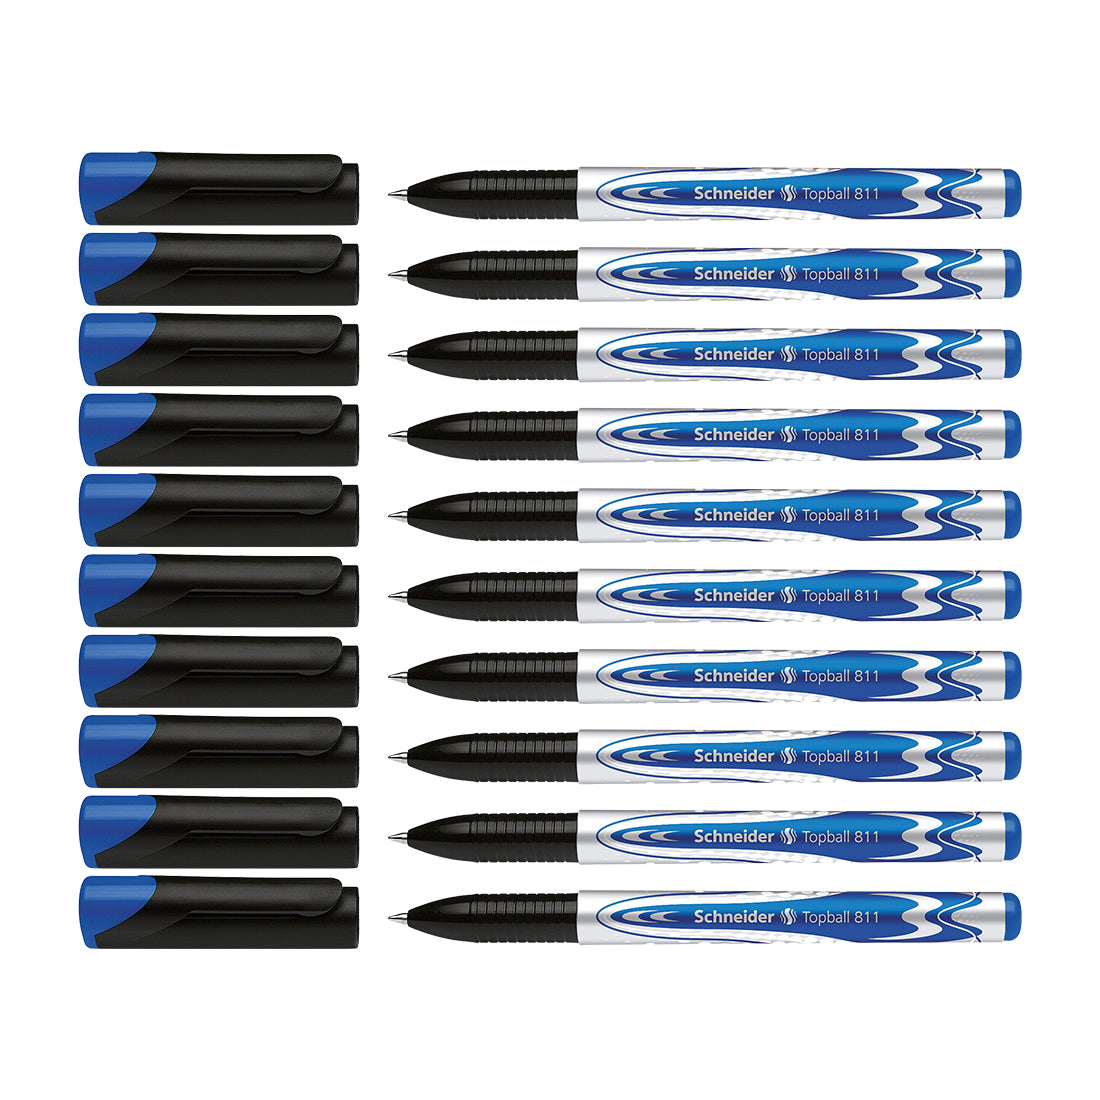 Topball 811 Rollerball 0.5mm, Box of 10#ink-color_blue